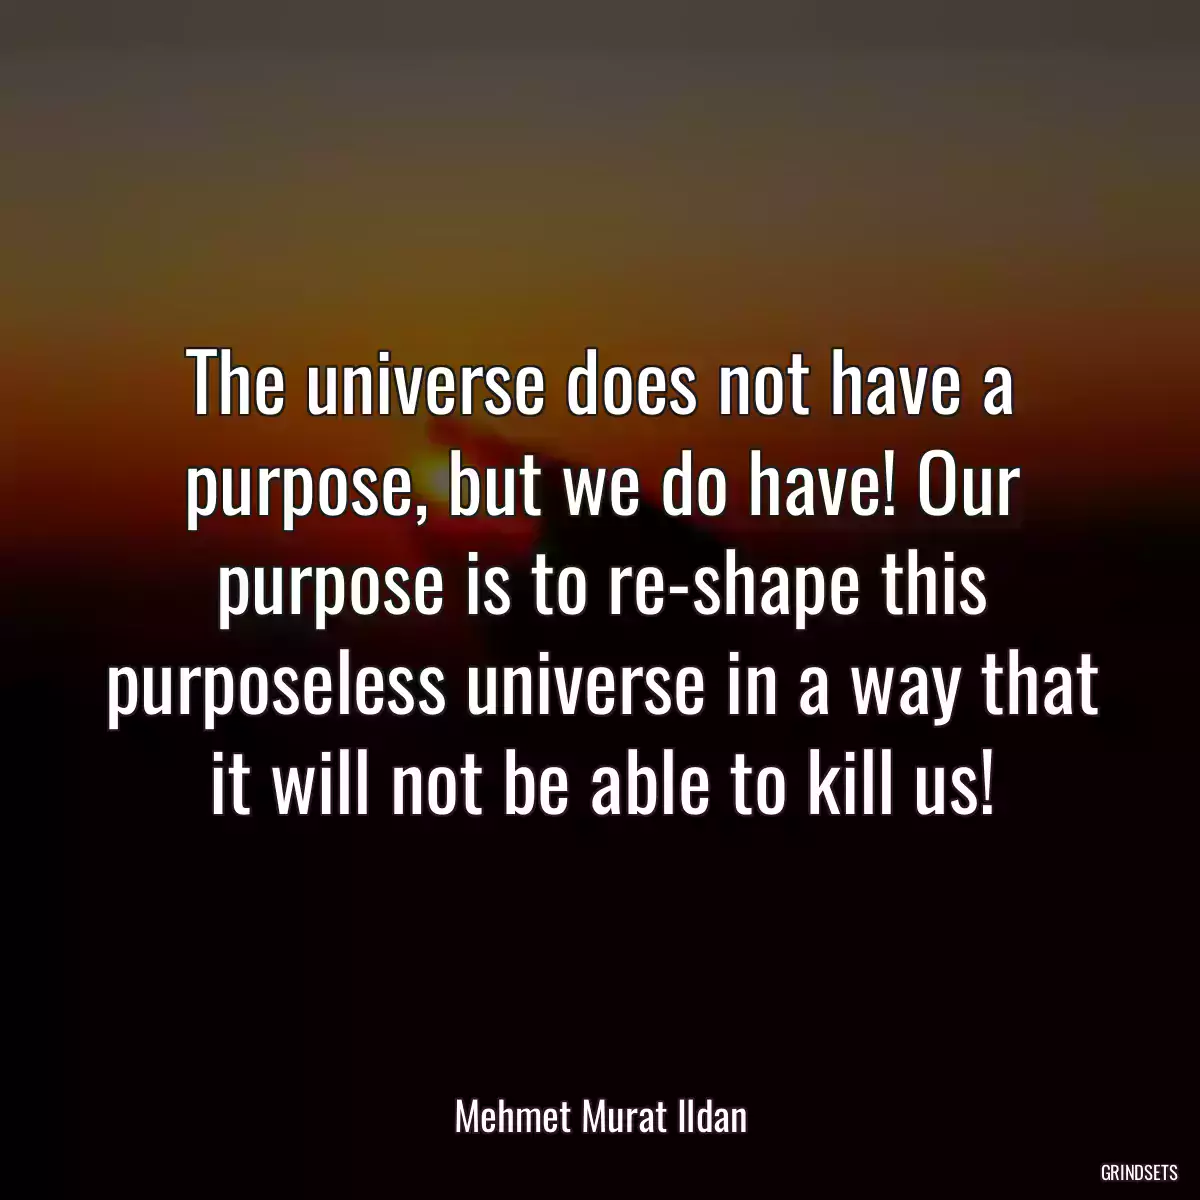 The universe does not have a purpose, but we do have! Our purpose is to re-shape this purposeless universe in a way that it will not be able to kill us!